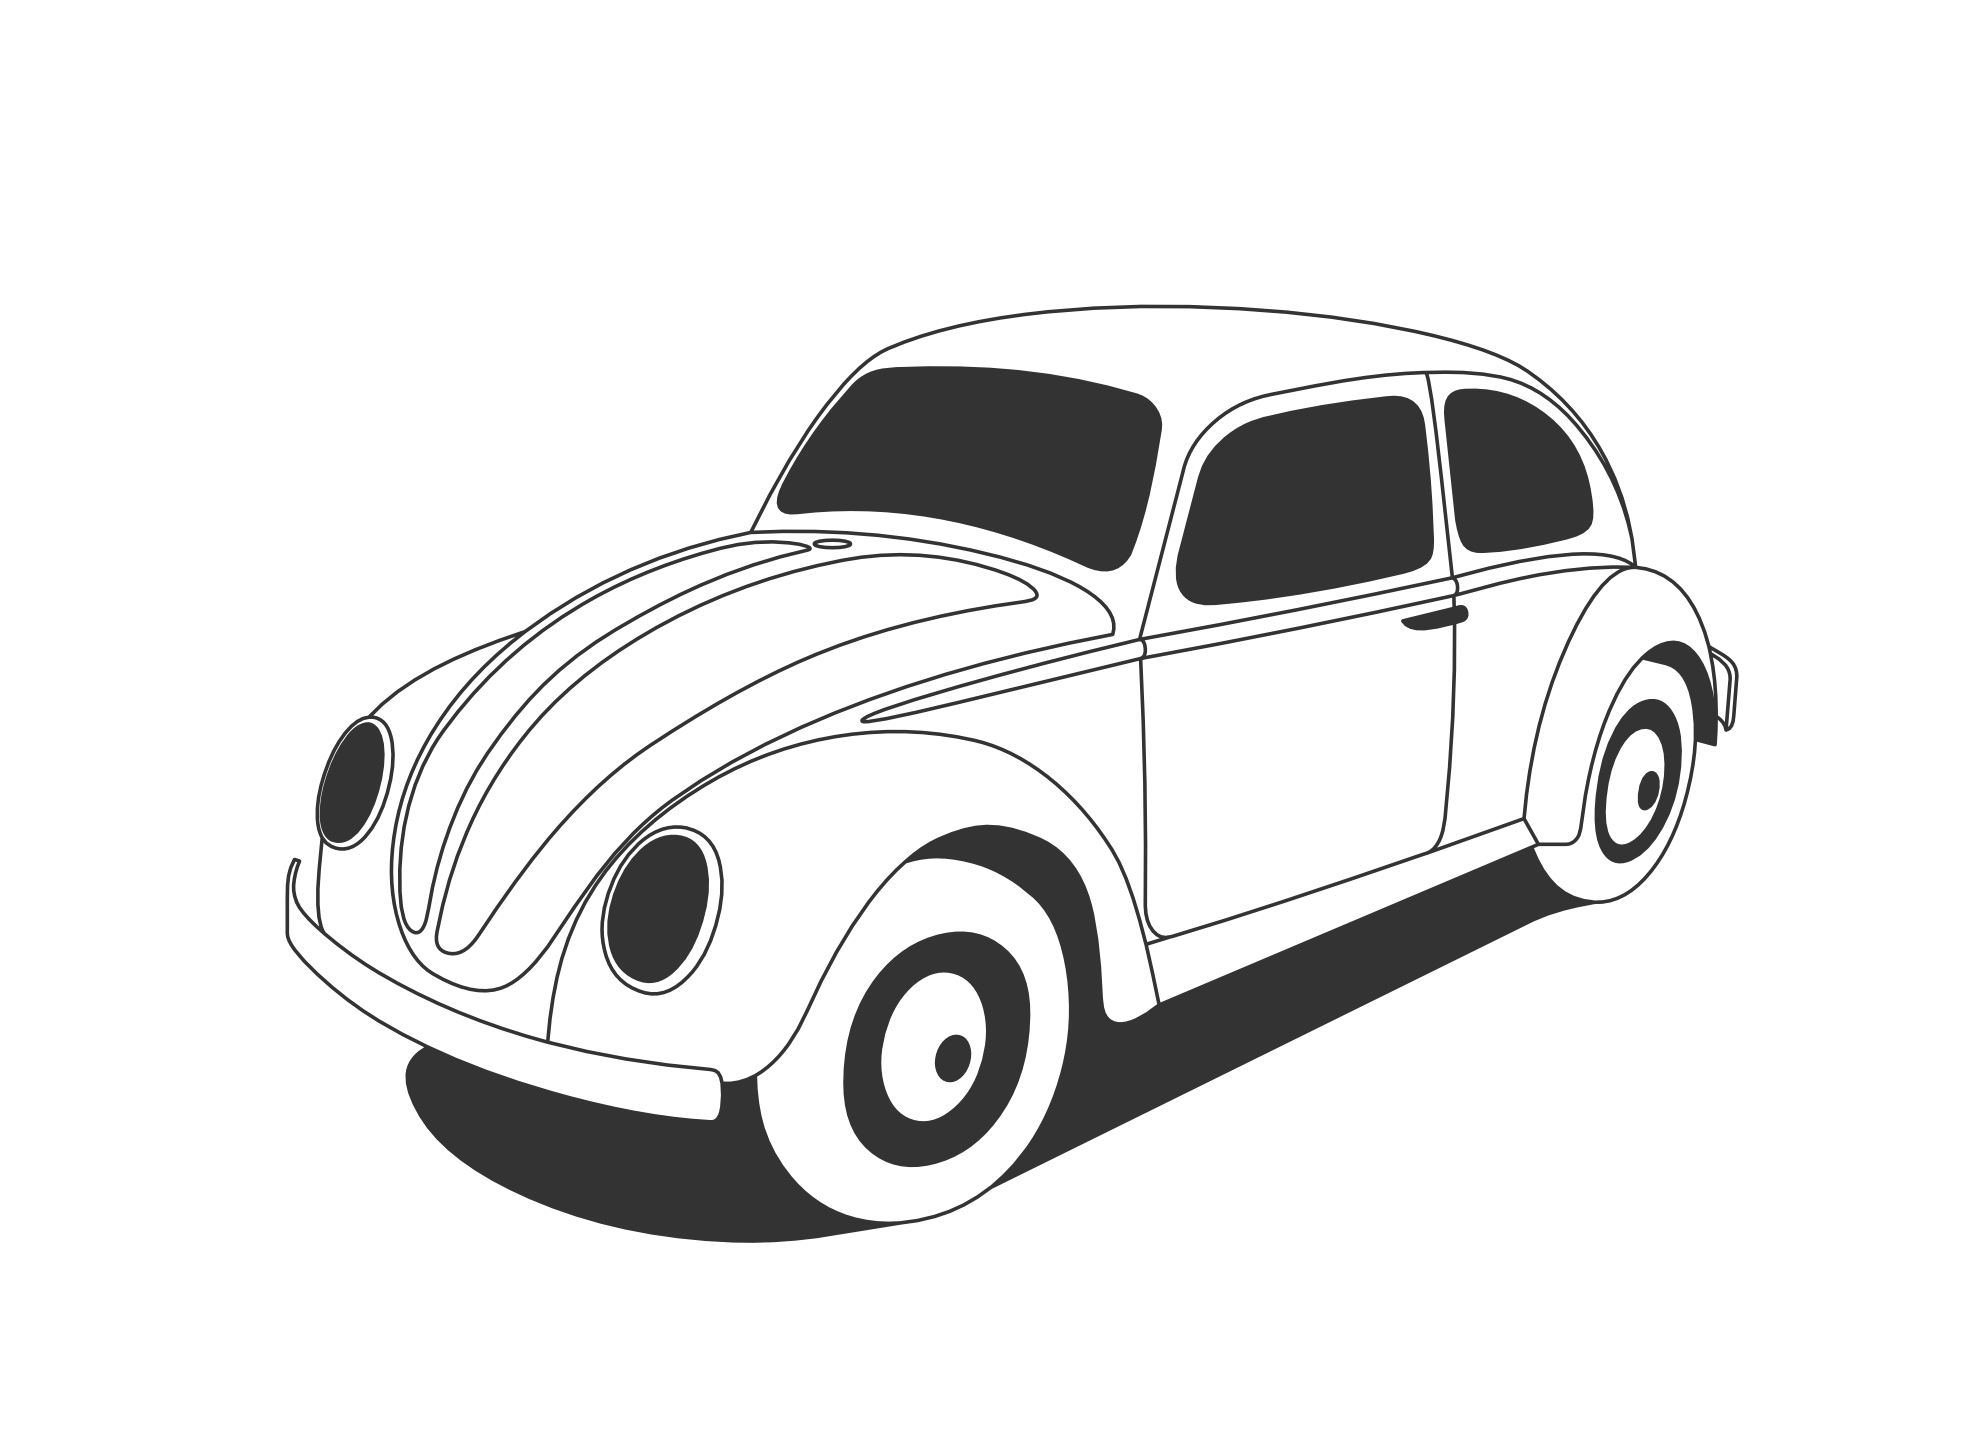 Vw Beetle Classic Black White Line Art Coloring Sheet Colouring Page